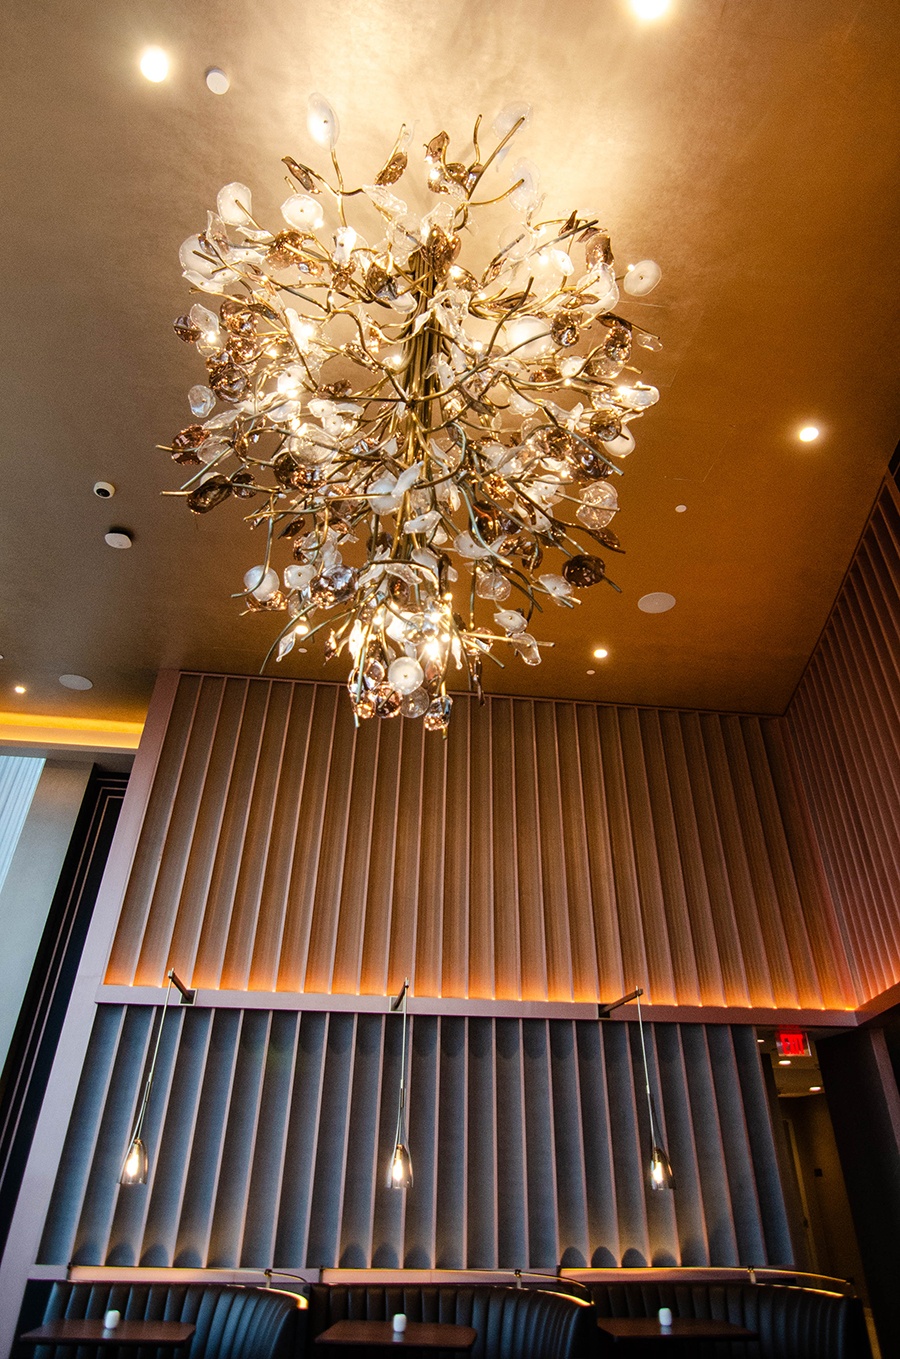 A dramatic chandelier hangs above a tall upscale restaurant.